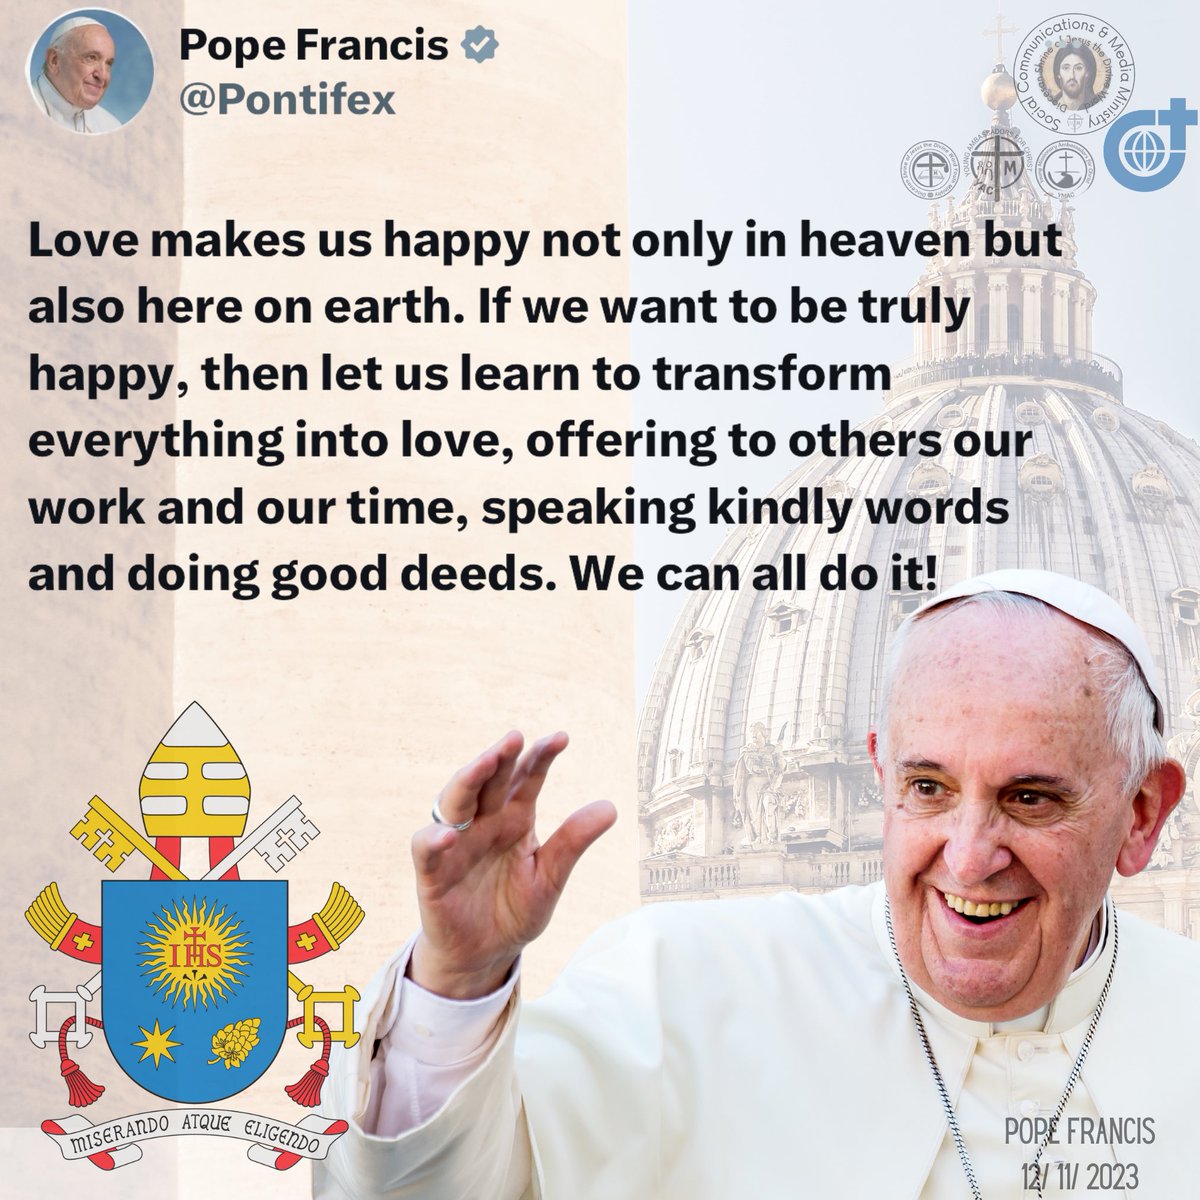 (His Holiness, Pope Francis - Monday in the 2nd Week of Advent, December 11, 2023)

#HolyFatherTweets #PopeFrancisTwitterTweets
#PapalTweets #PontifexTweets #SVD #DSJDW #CtKMS #YAC #YMAC #SYM #SVDyouth #ShrineYouth #PrayAlways (ctto)